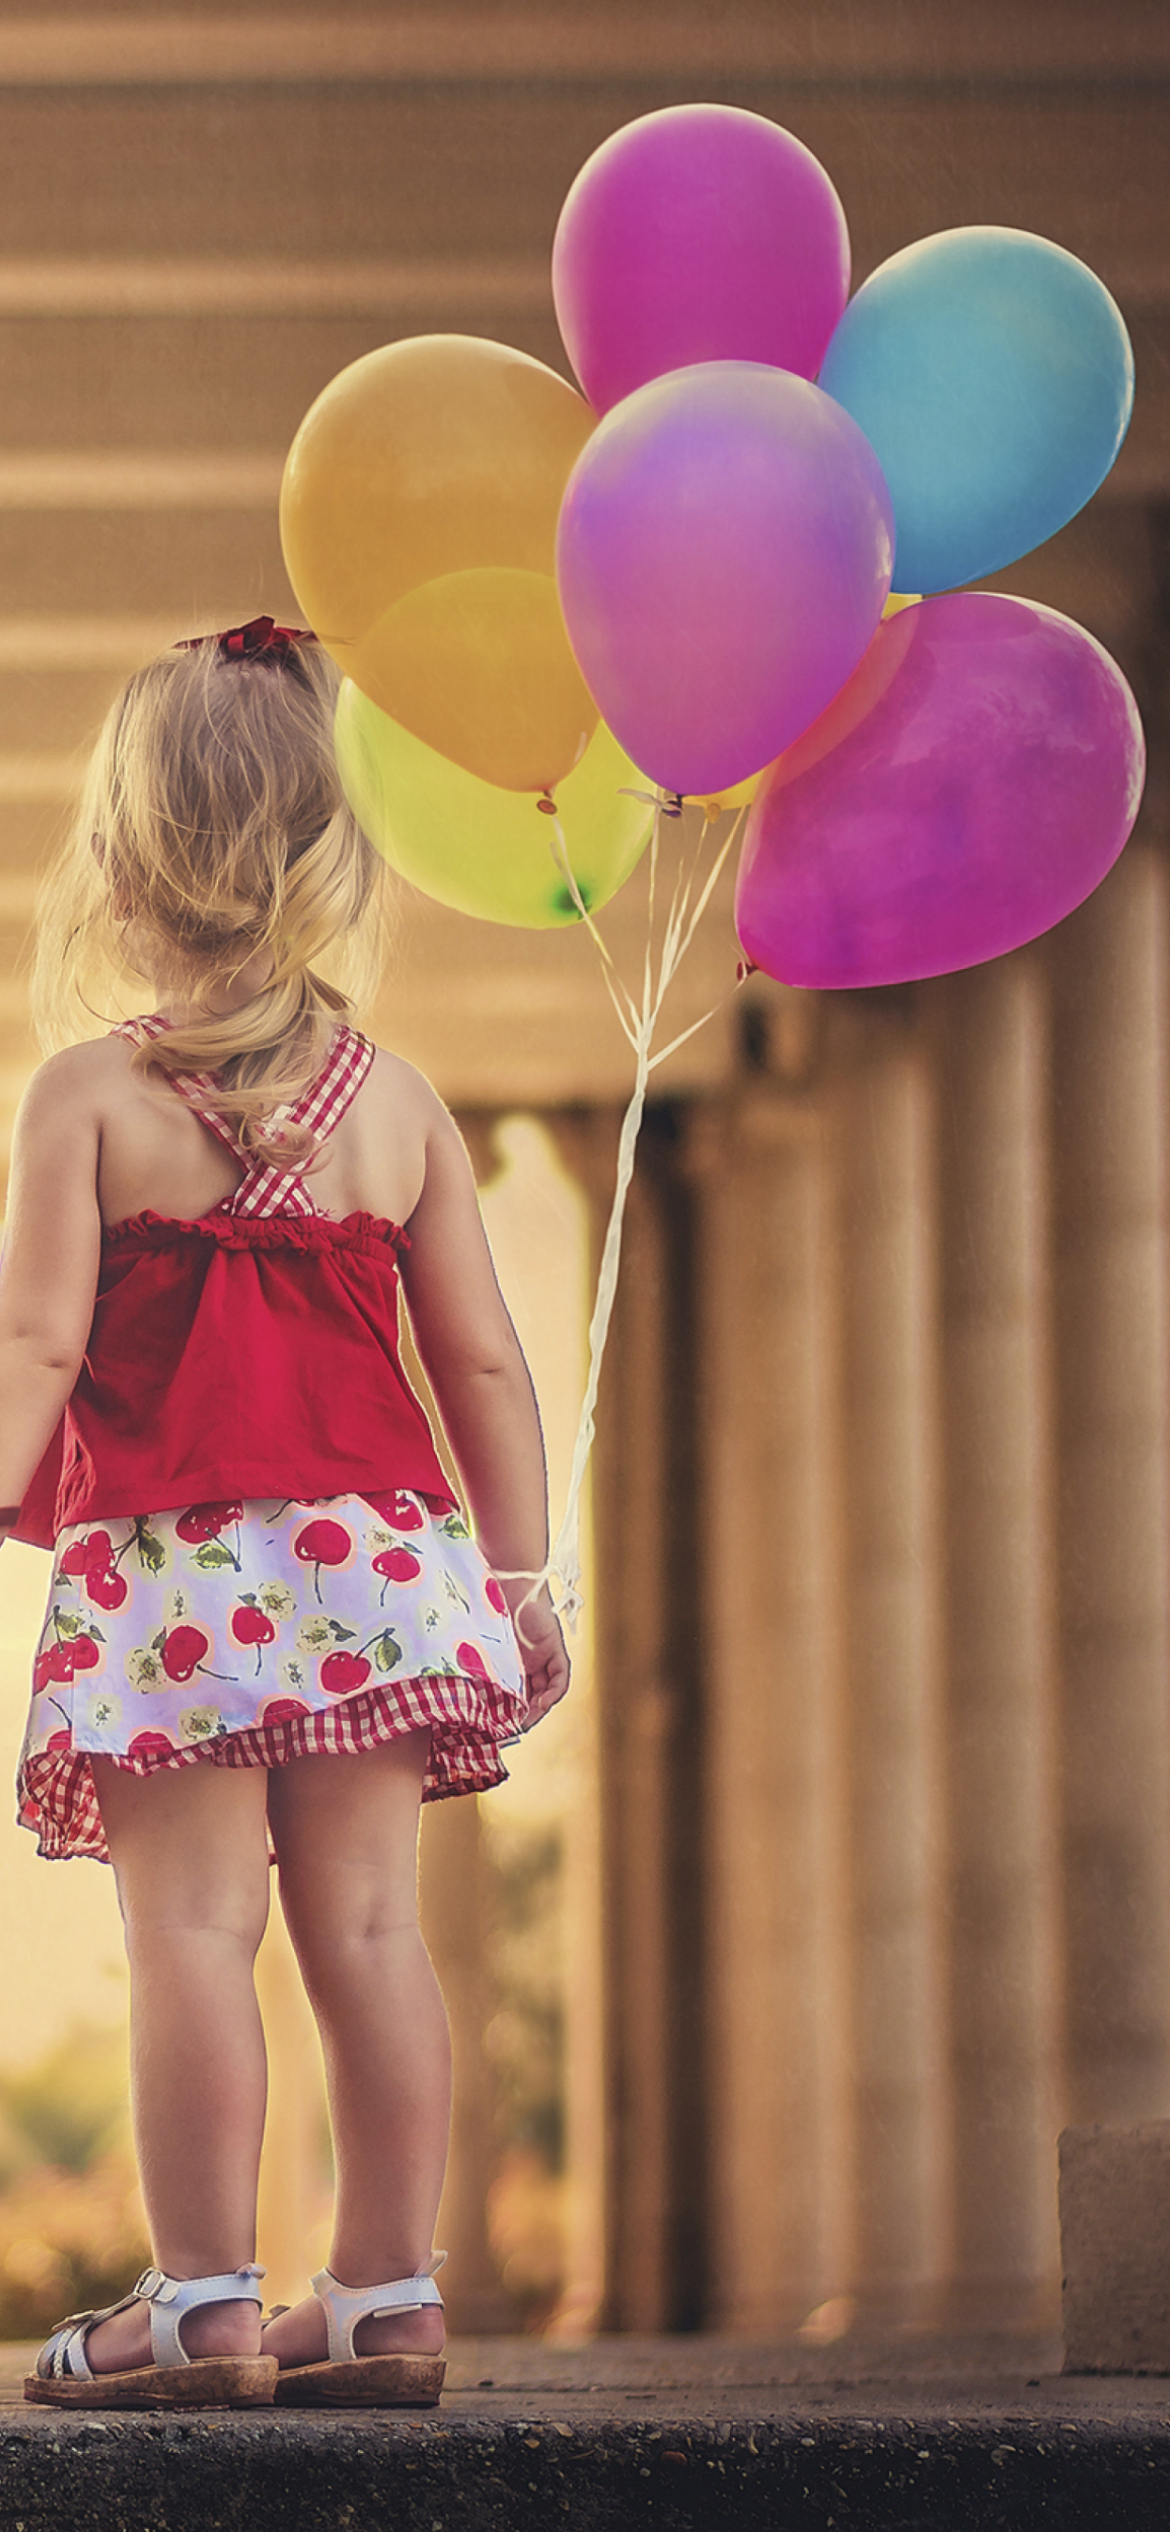 Little Girl With Colorful Balloons wallpaper 1170x2532